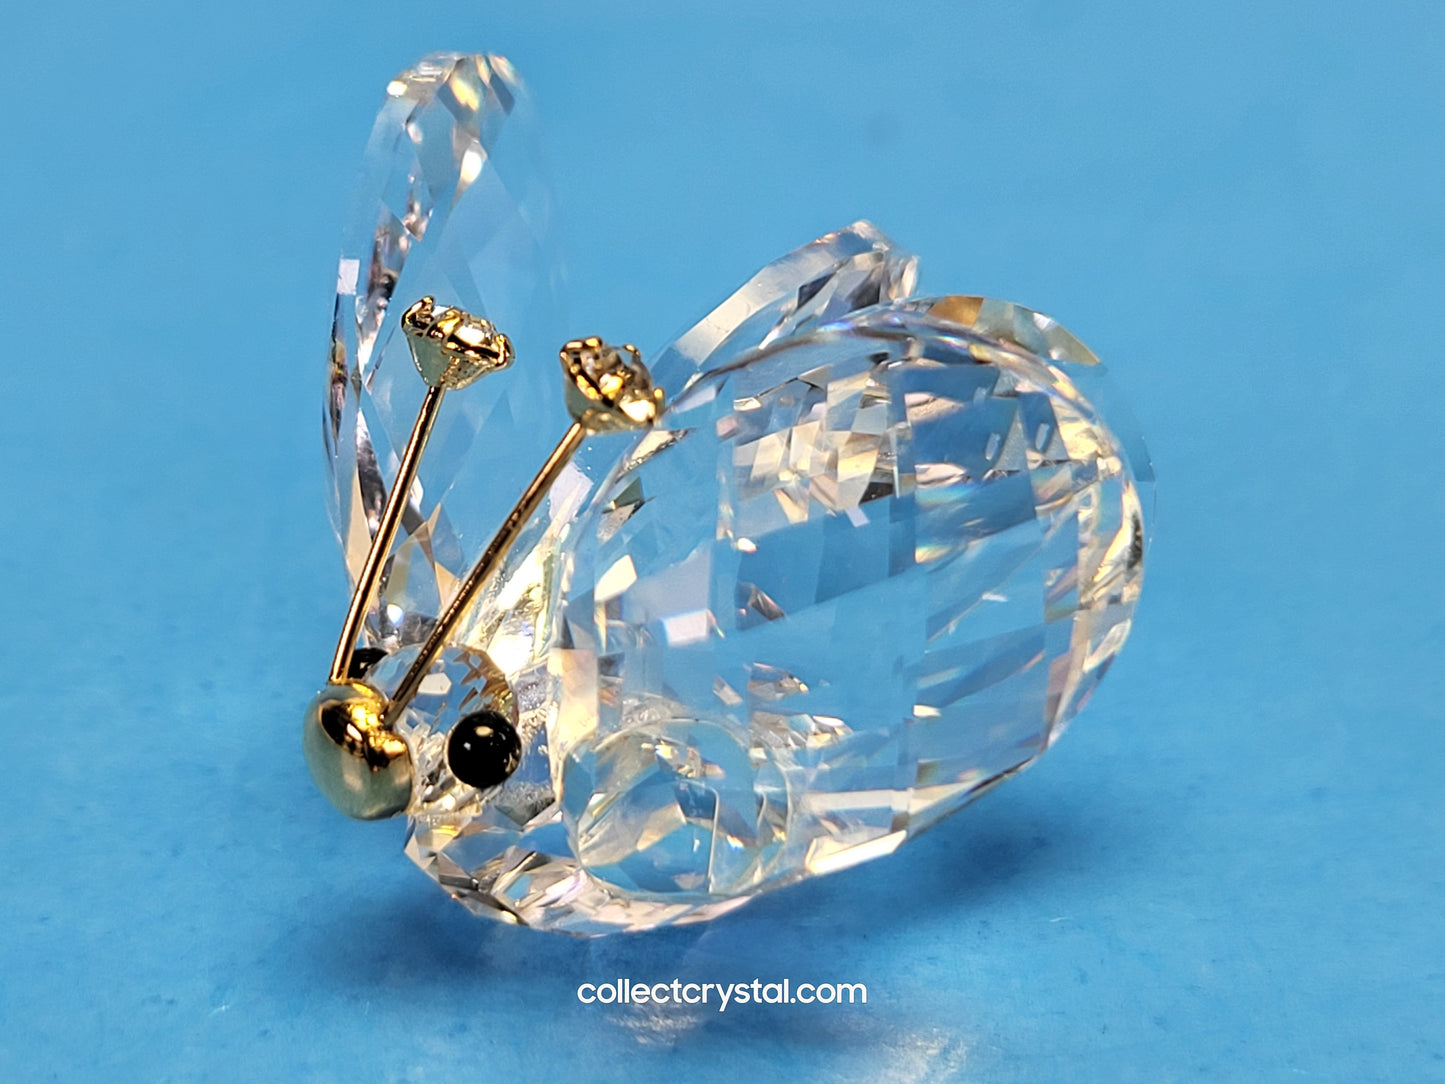 BUTTERFLY MINI V2 (USA ISSUE ONLY) CRYSTAL TIPS ON GOLD ANTENNA 7631NR30